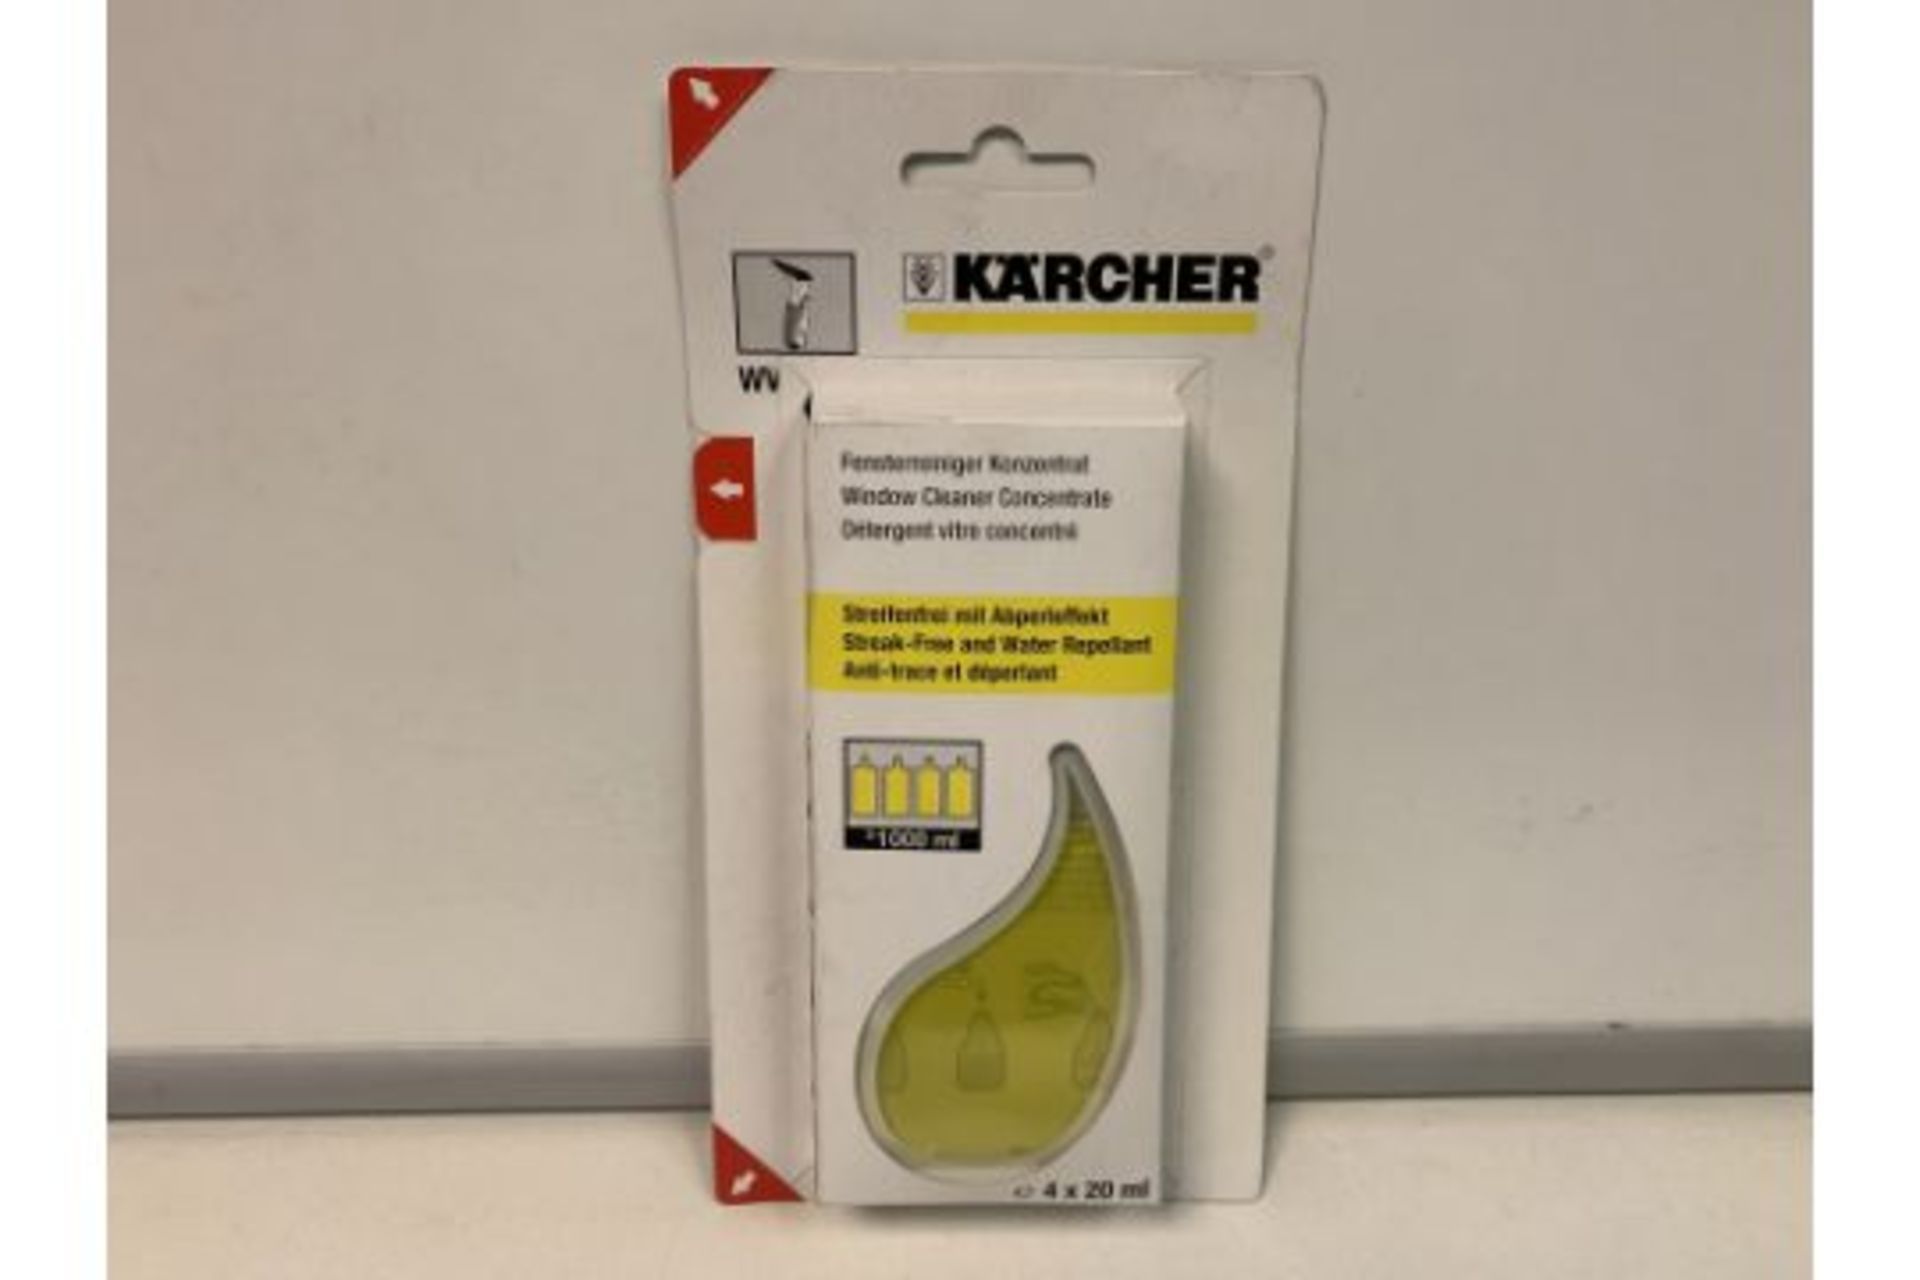 24 X NEW PACKS OF 4 KARCHER WINDOW CLEANER CONCENTRATE. STREAK FREE, WATER REPELLANT. (ROW19)